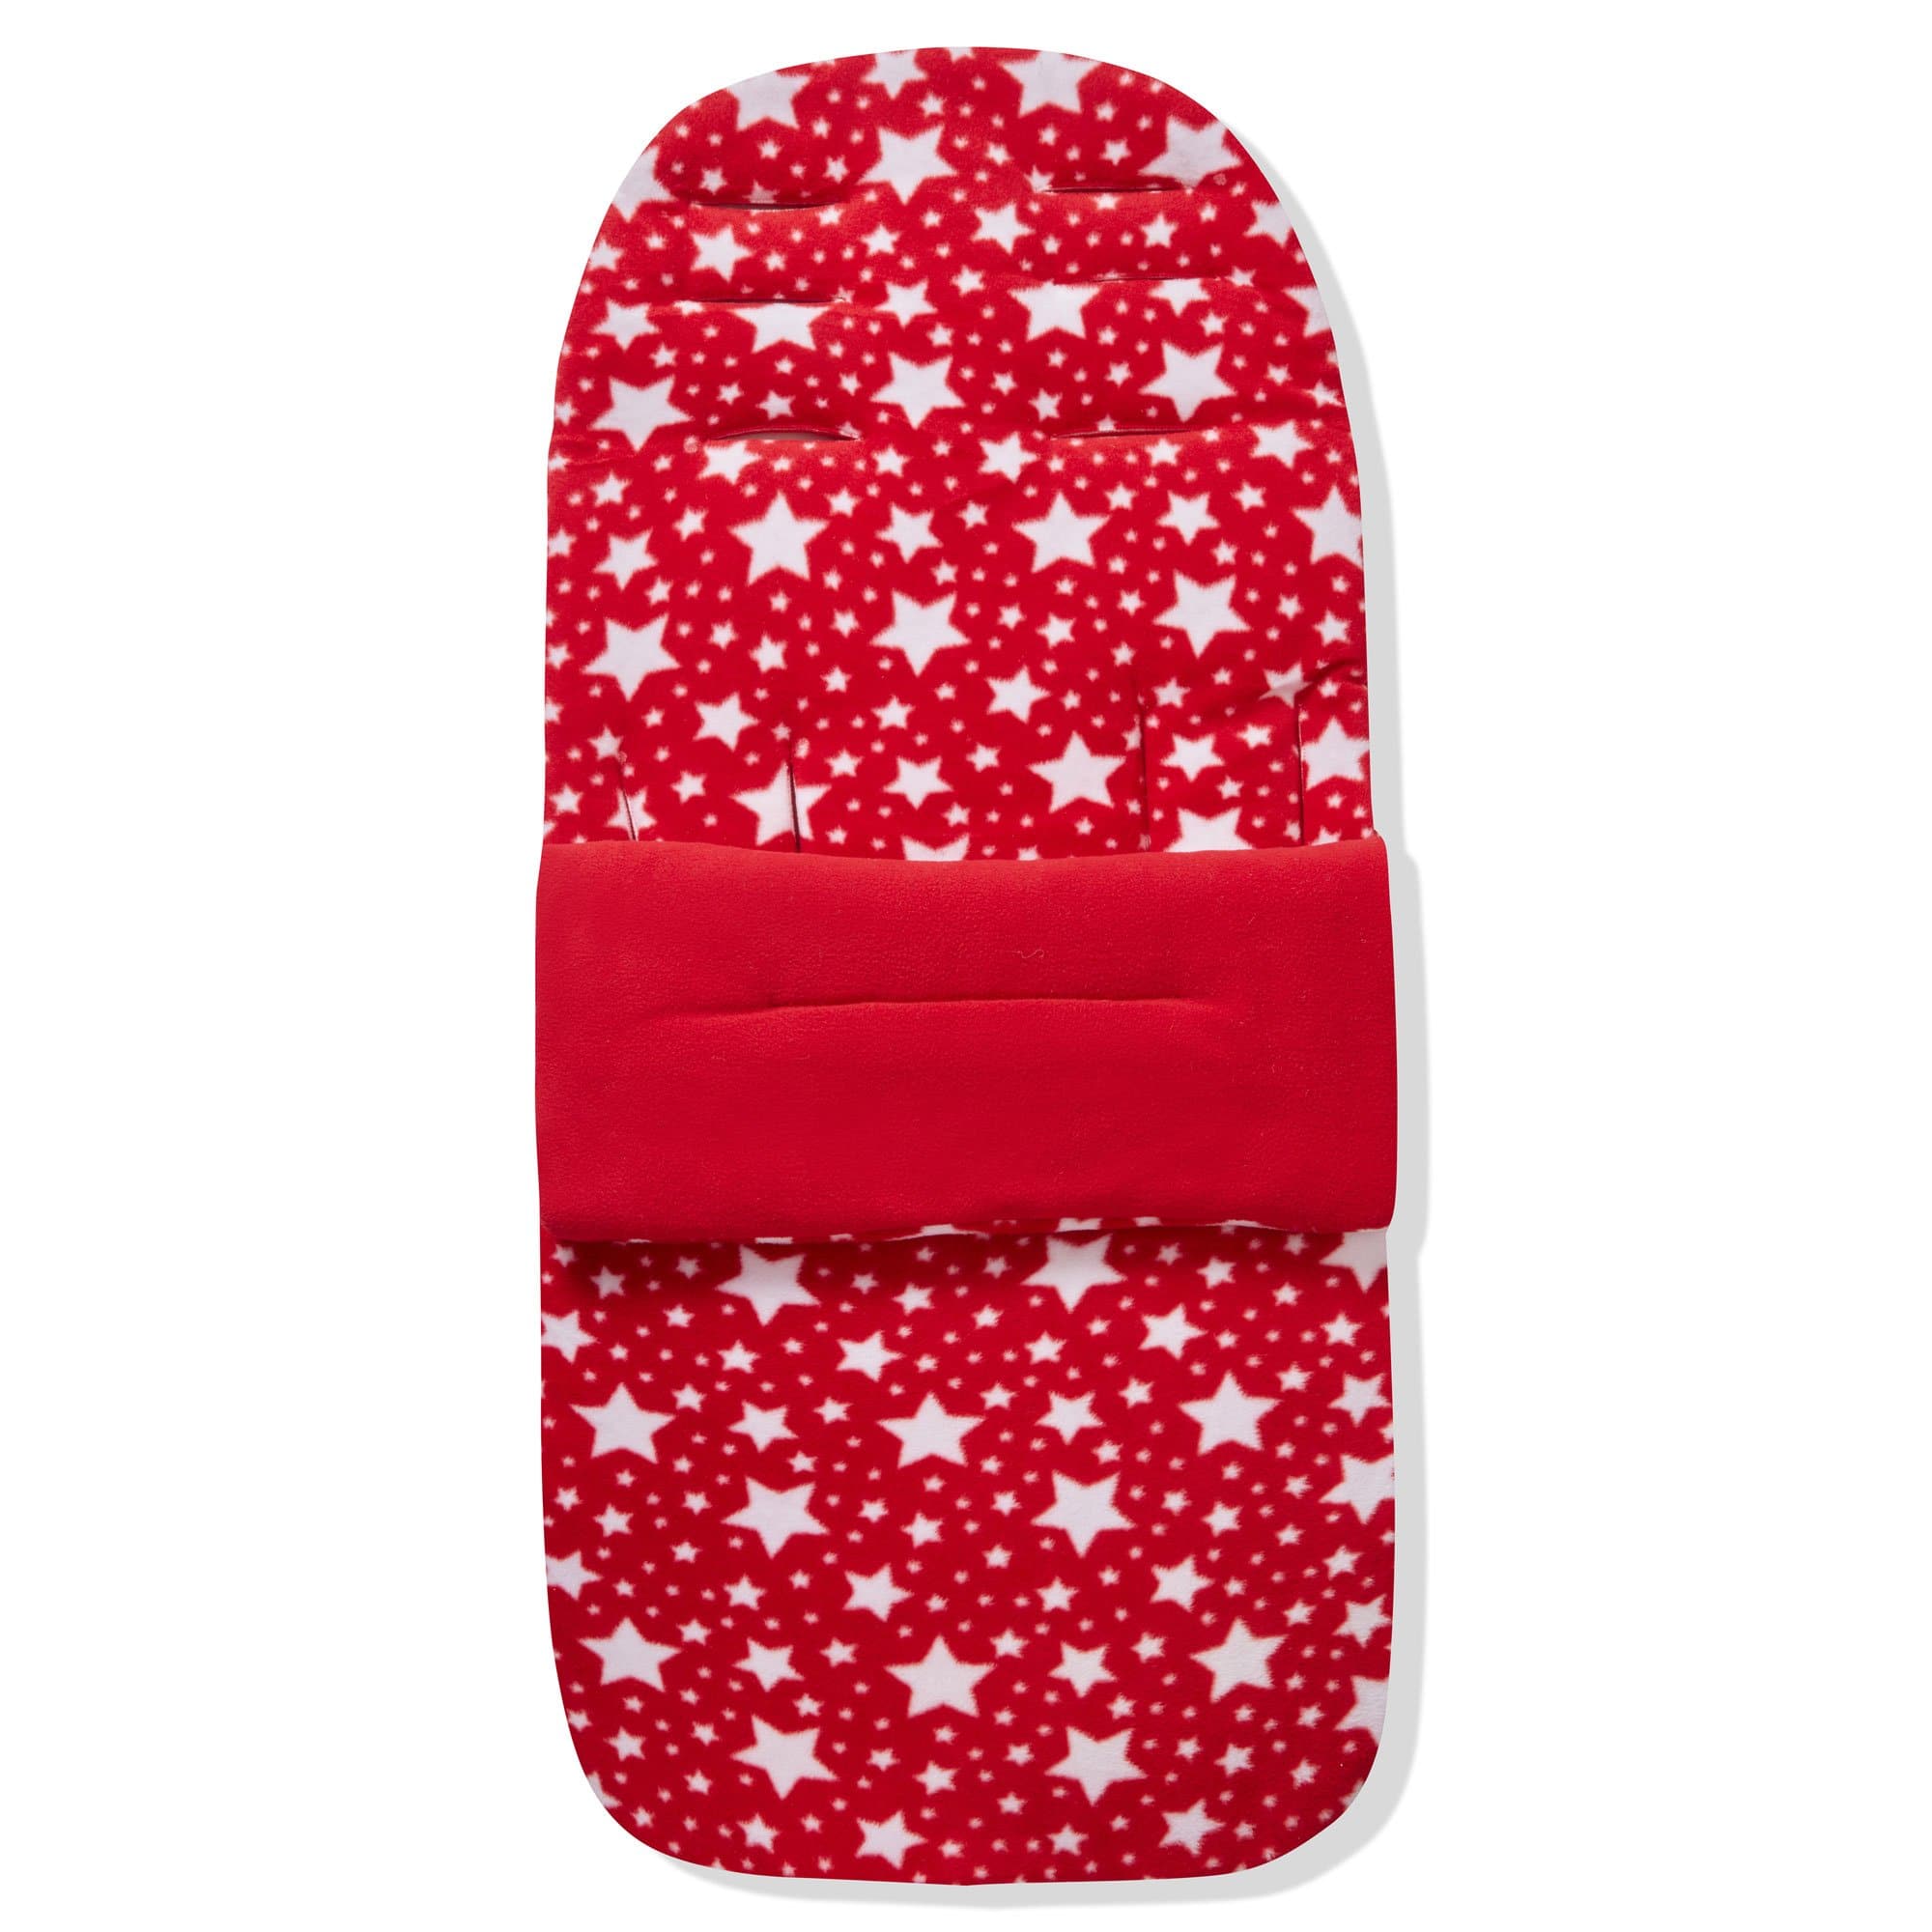 Fleece Footmuff / Cosy Toes Compatible with Cybex - For Your Little One